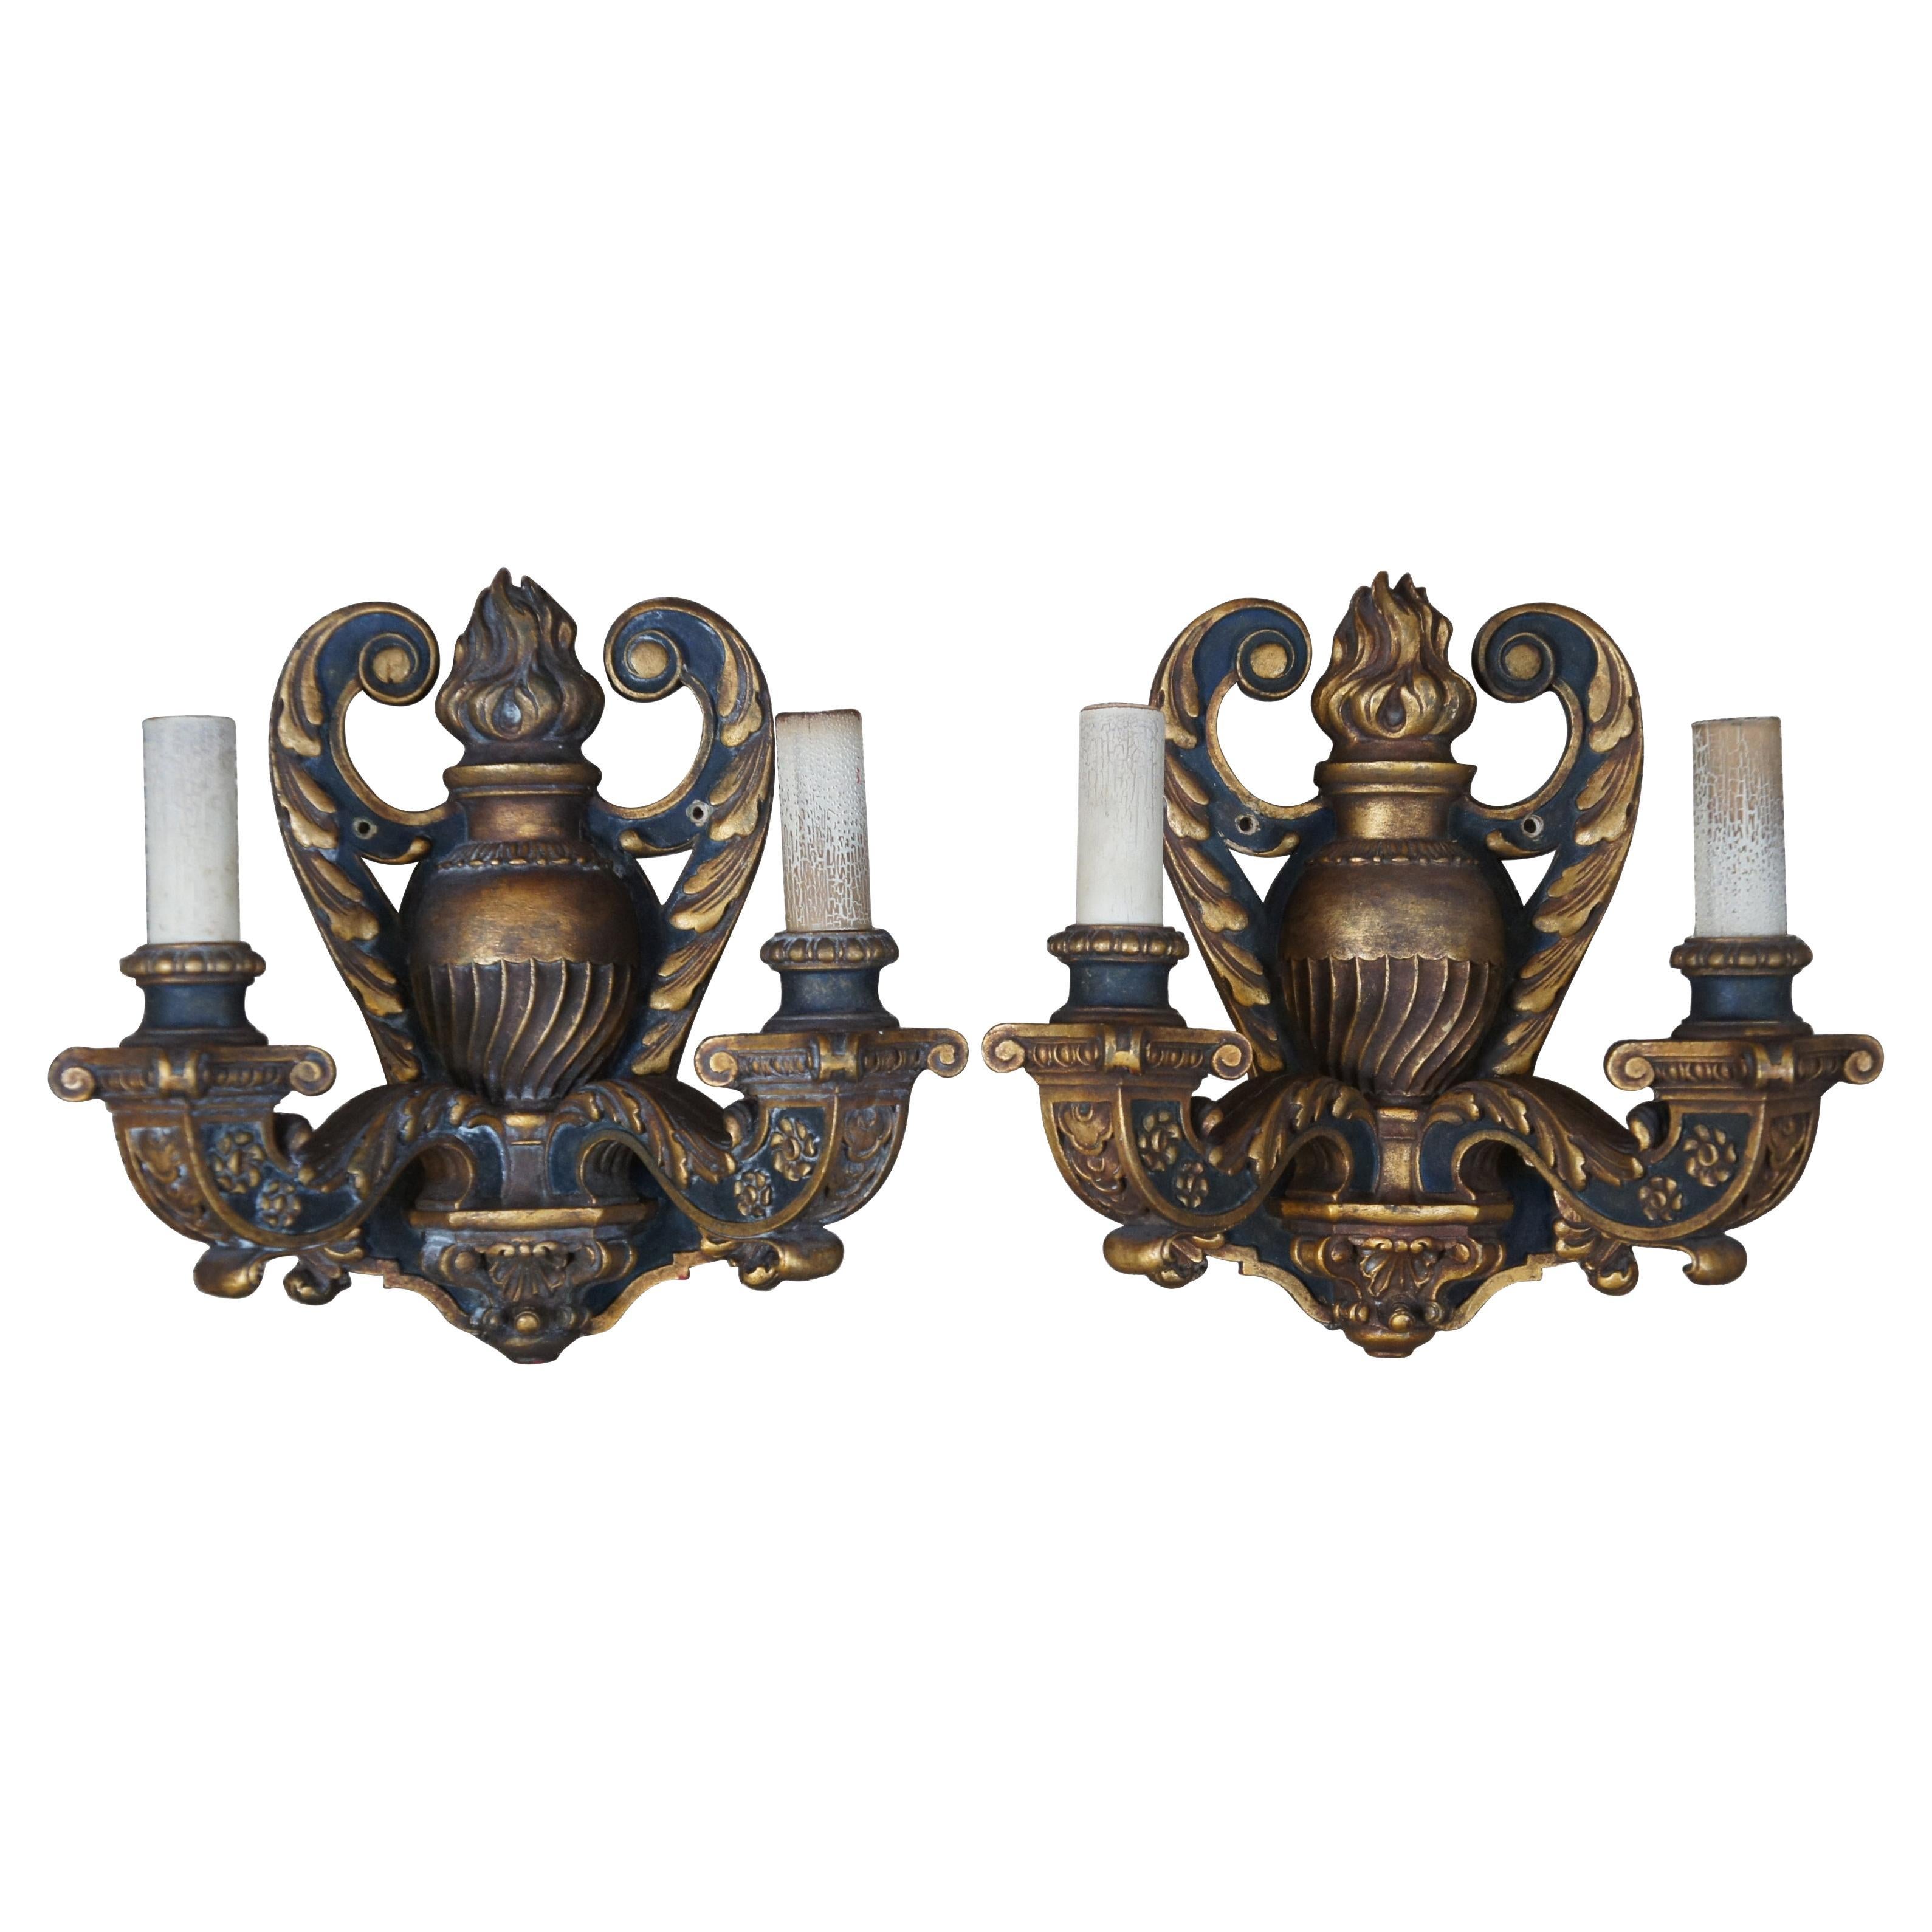 2 Antique Baroque Revival Neoclassical Carved Two Light Candelabra Wall Sconces For Sale